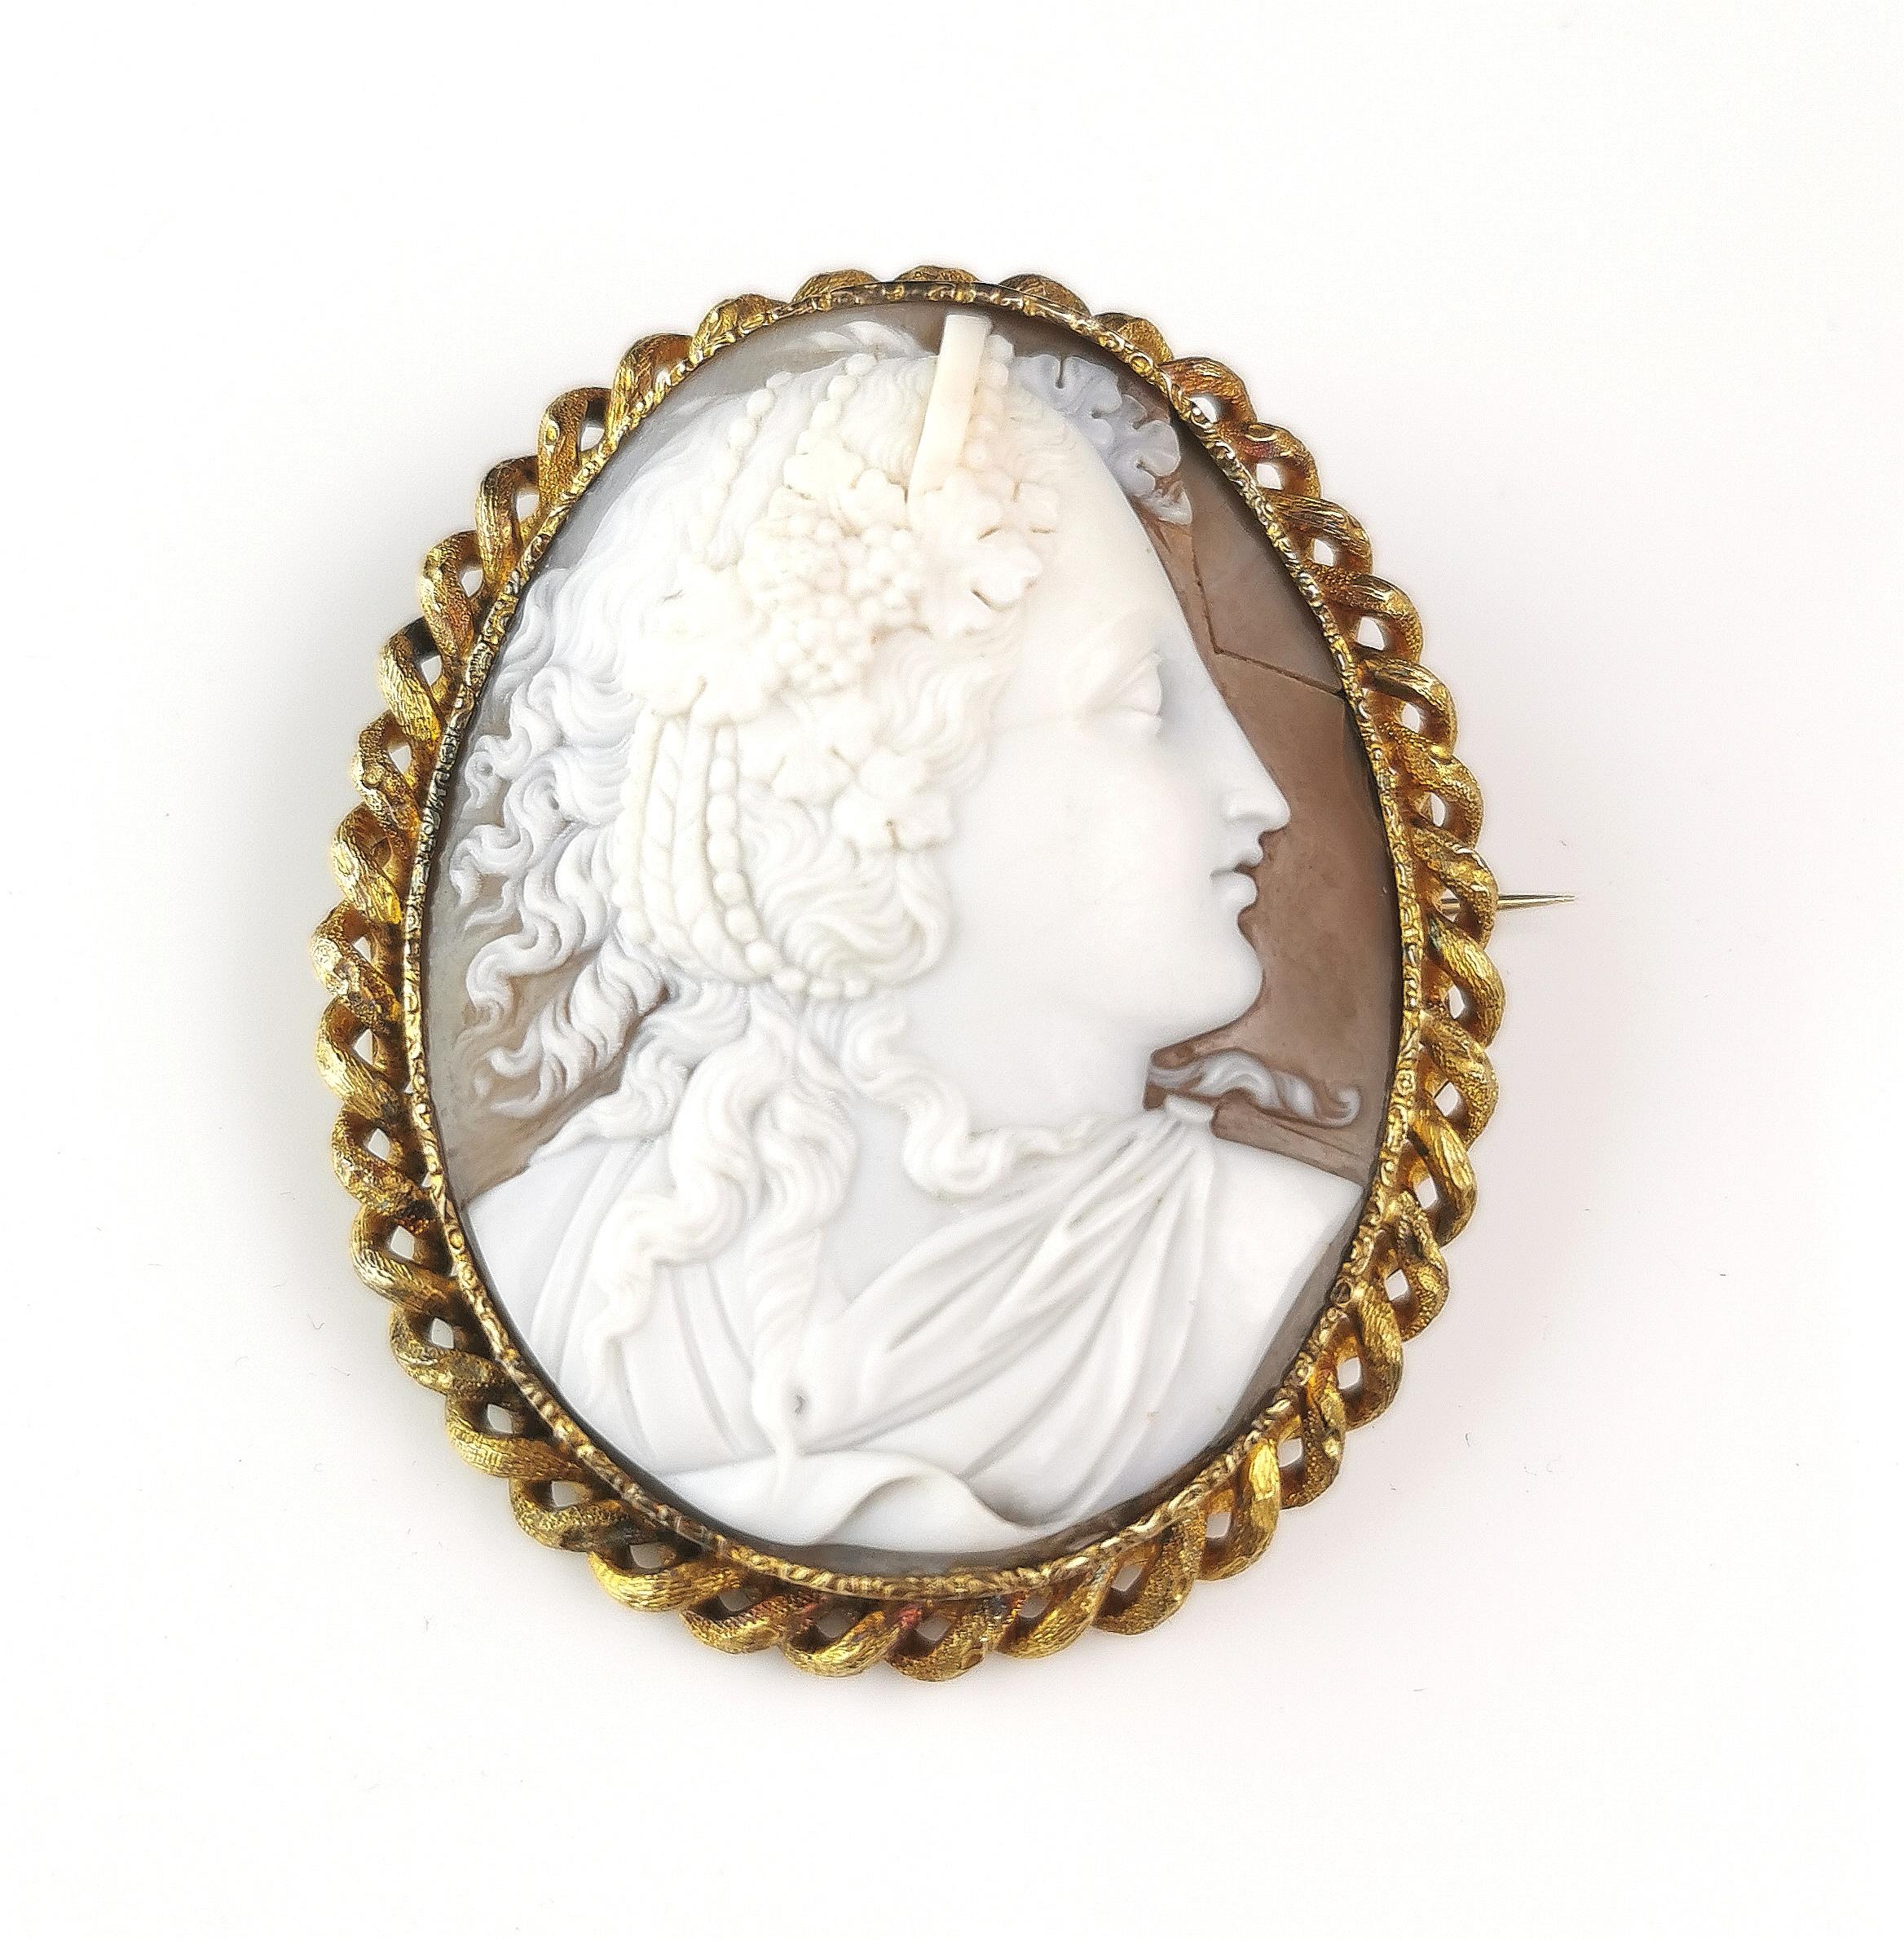 A beautiful antique Victorian era cameo brooch.

Very finely carved from bullmouth shell it features a beautiful Bacchante and the detailing is really very well done, certainly a more finely carved cameo and it's always a real treat to find